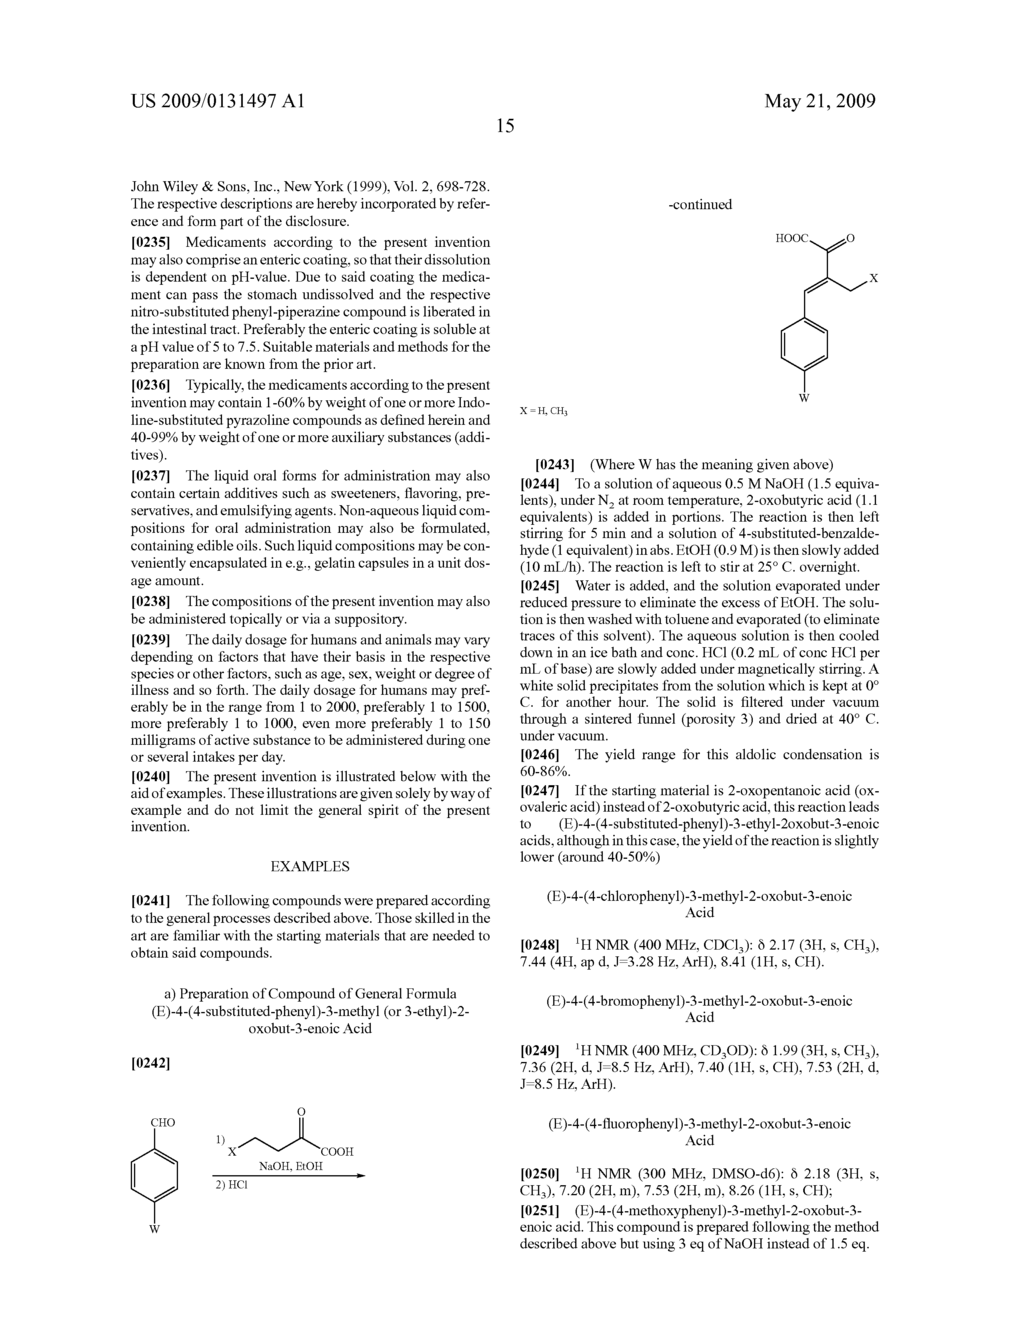 INDOLINE-SUBSTITUTED PYRAZOLINE DERIVATIVES, THEIR PREPARATION AND USE AS MEDICAMENTS - diagram, schematic, and image 16